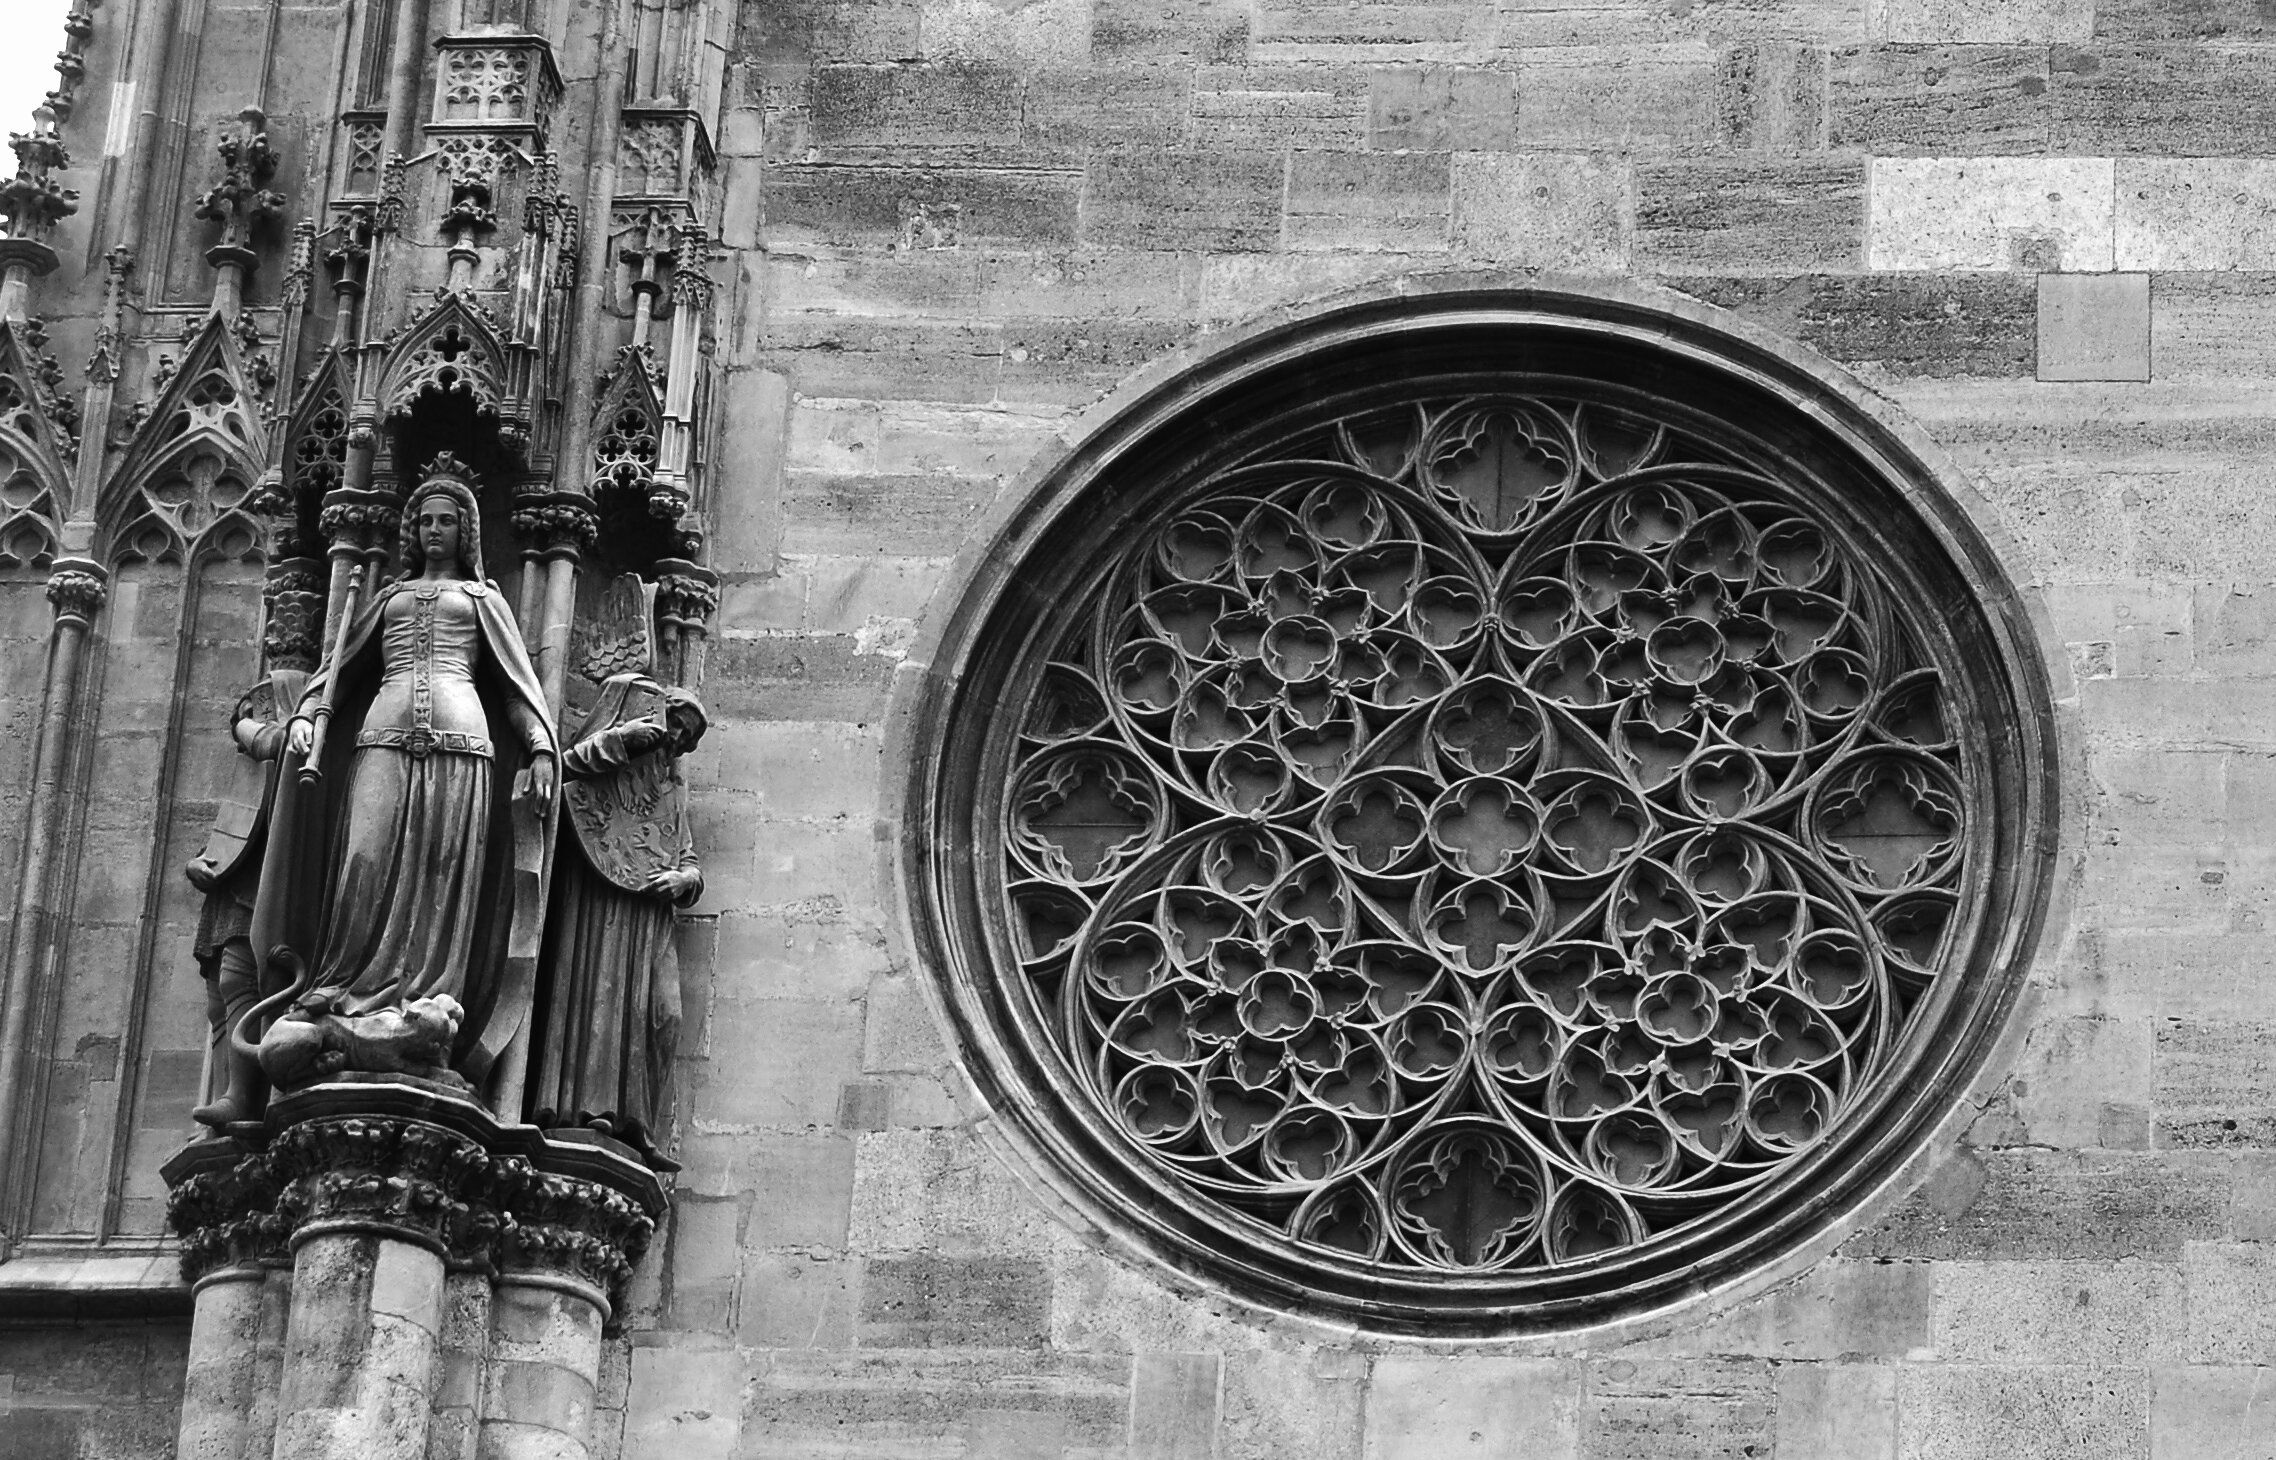 Title: St. Stephens Cathedral (Vienna)